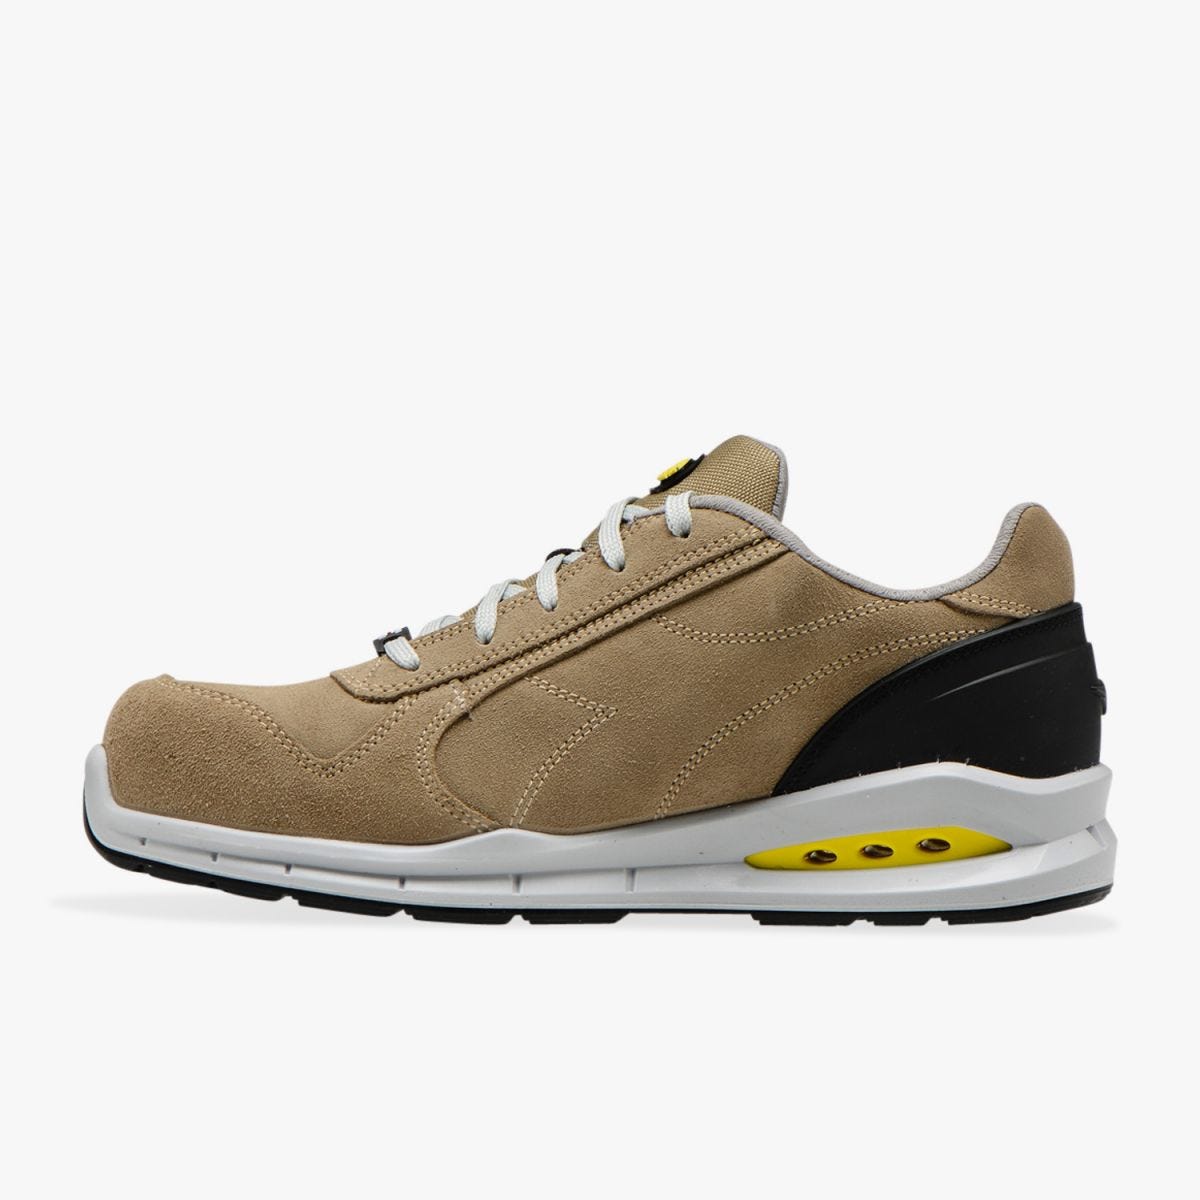 CHAUSSURE SECURITE RUN NET AIRBOX LOW S3 SRC TAUPE/TAUPE - Diadora - Taille 36 1